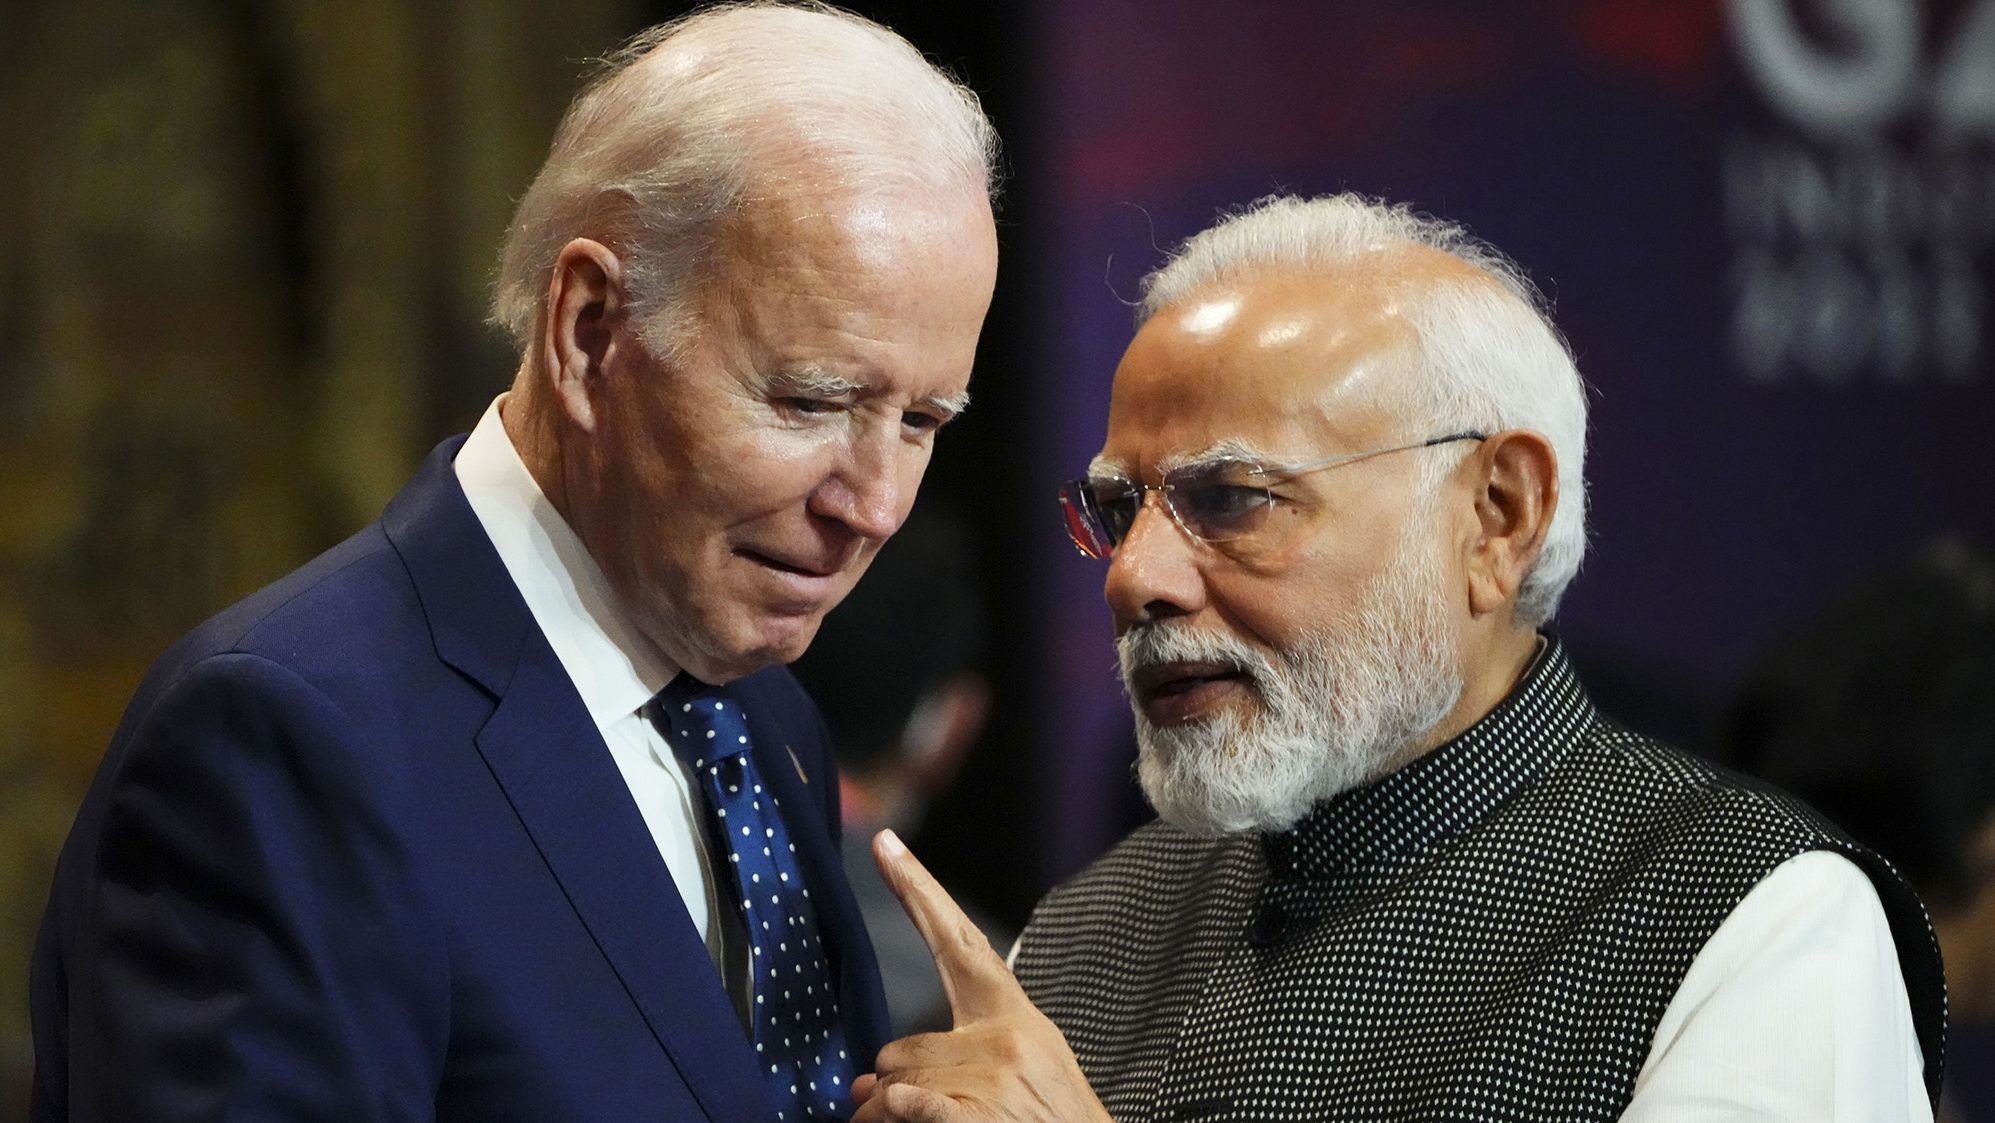 India's Prime Minister Narendra Modi talks with US President Joe Biden as they arrive for the first working session of the G20 leaders' summit in Bali on Tuesday,